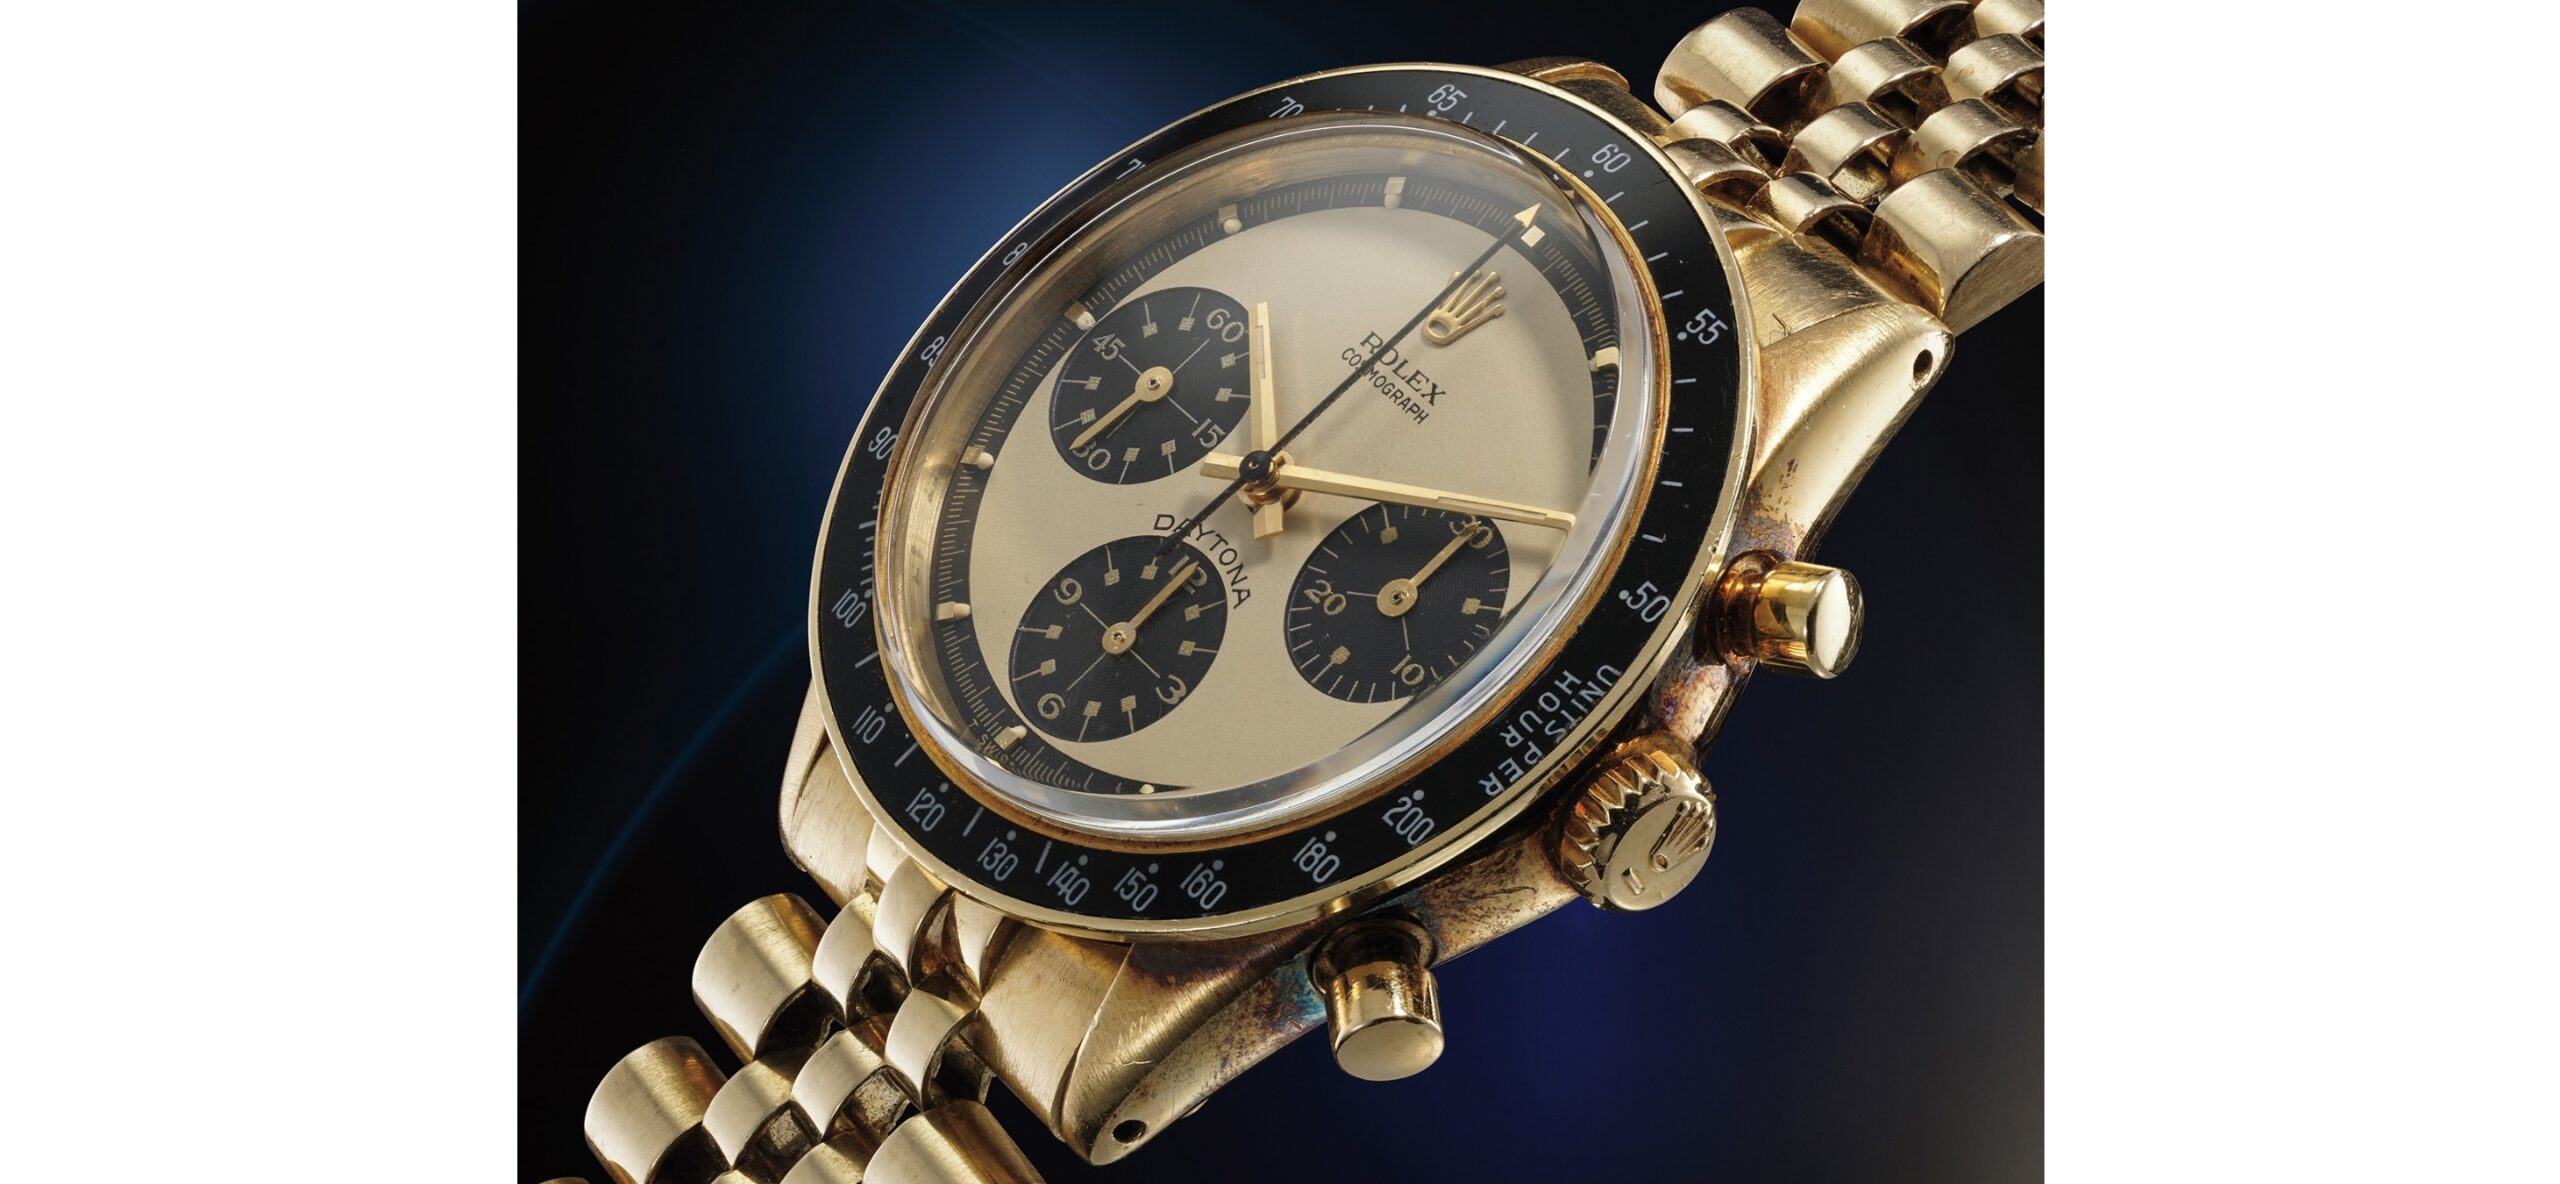 Rolex Ref. 6241 : A rare yellow gold chronograph wristwatch with bracelet and "Paul Newman" champagne dial. Image Credit @ Phillips